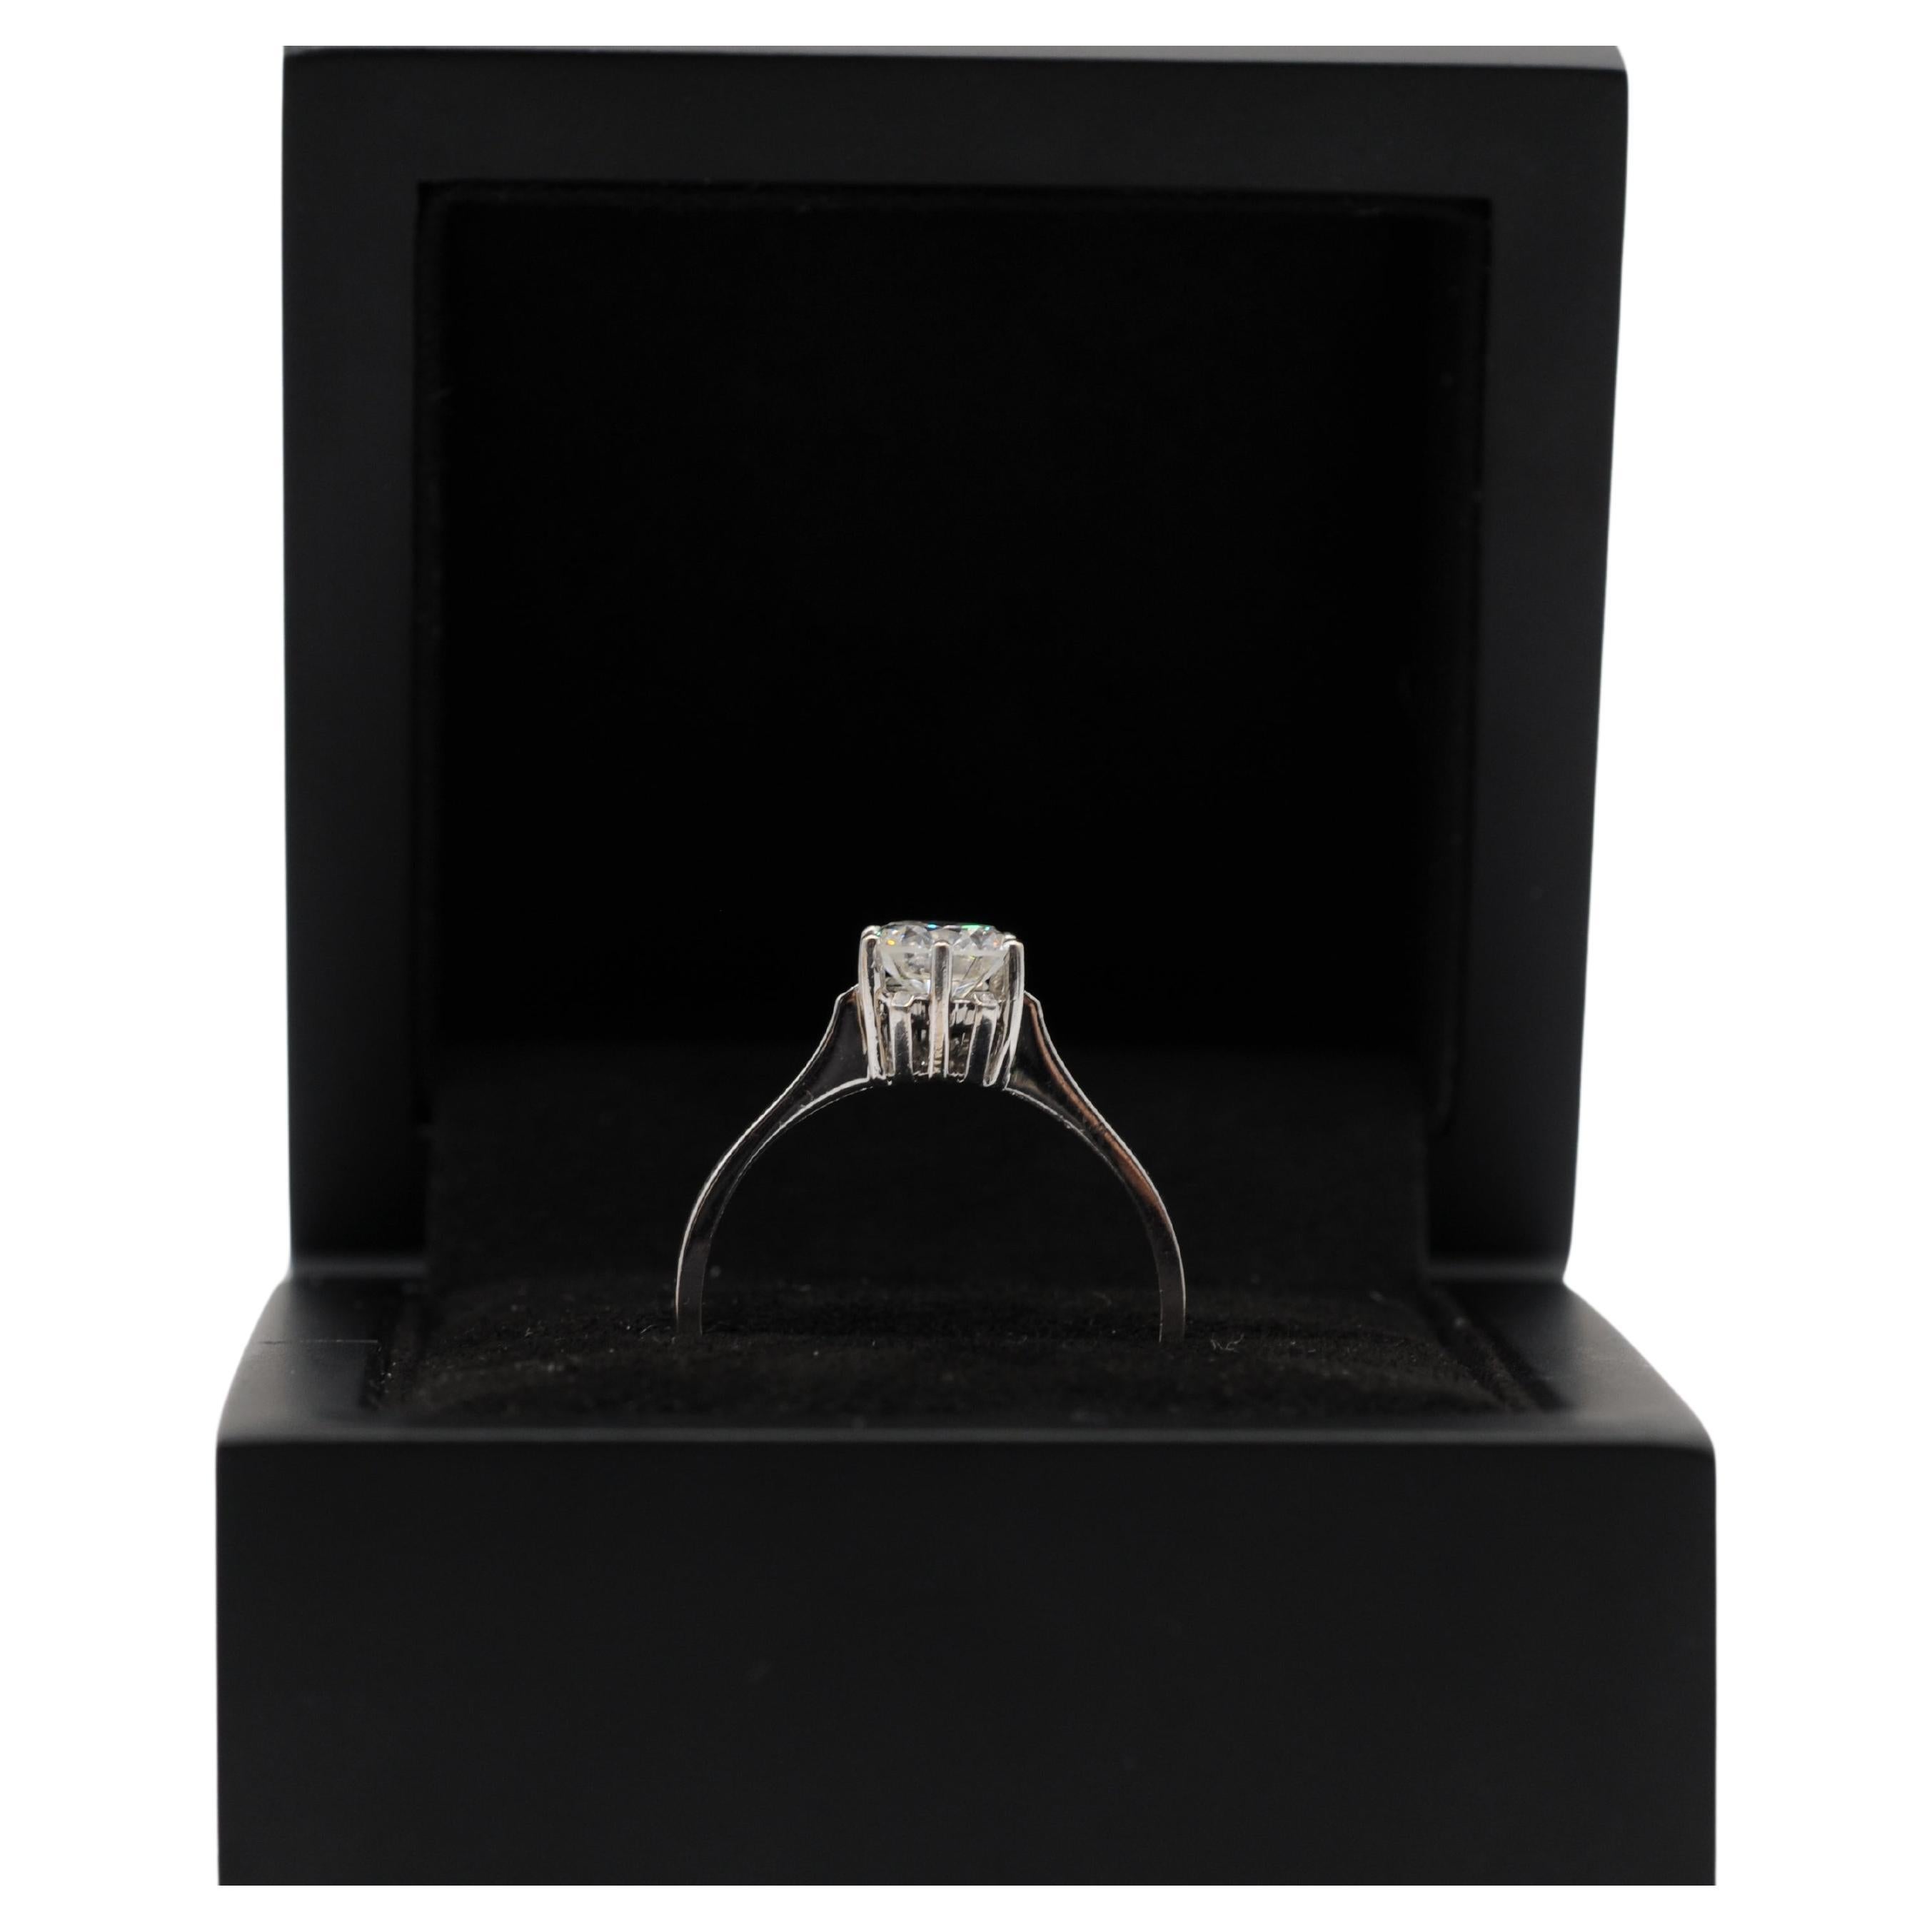 Majestic solitare Ring with ca: 1.0ct diamond VVS2 Color:G For Sale 1